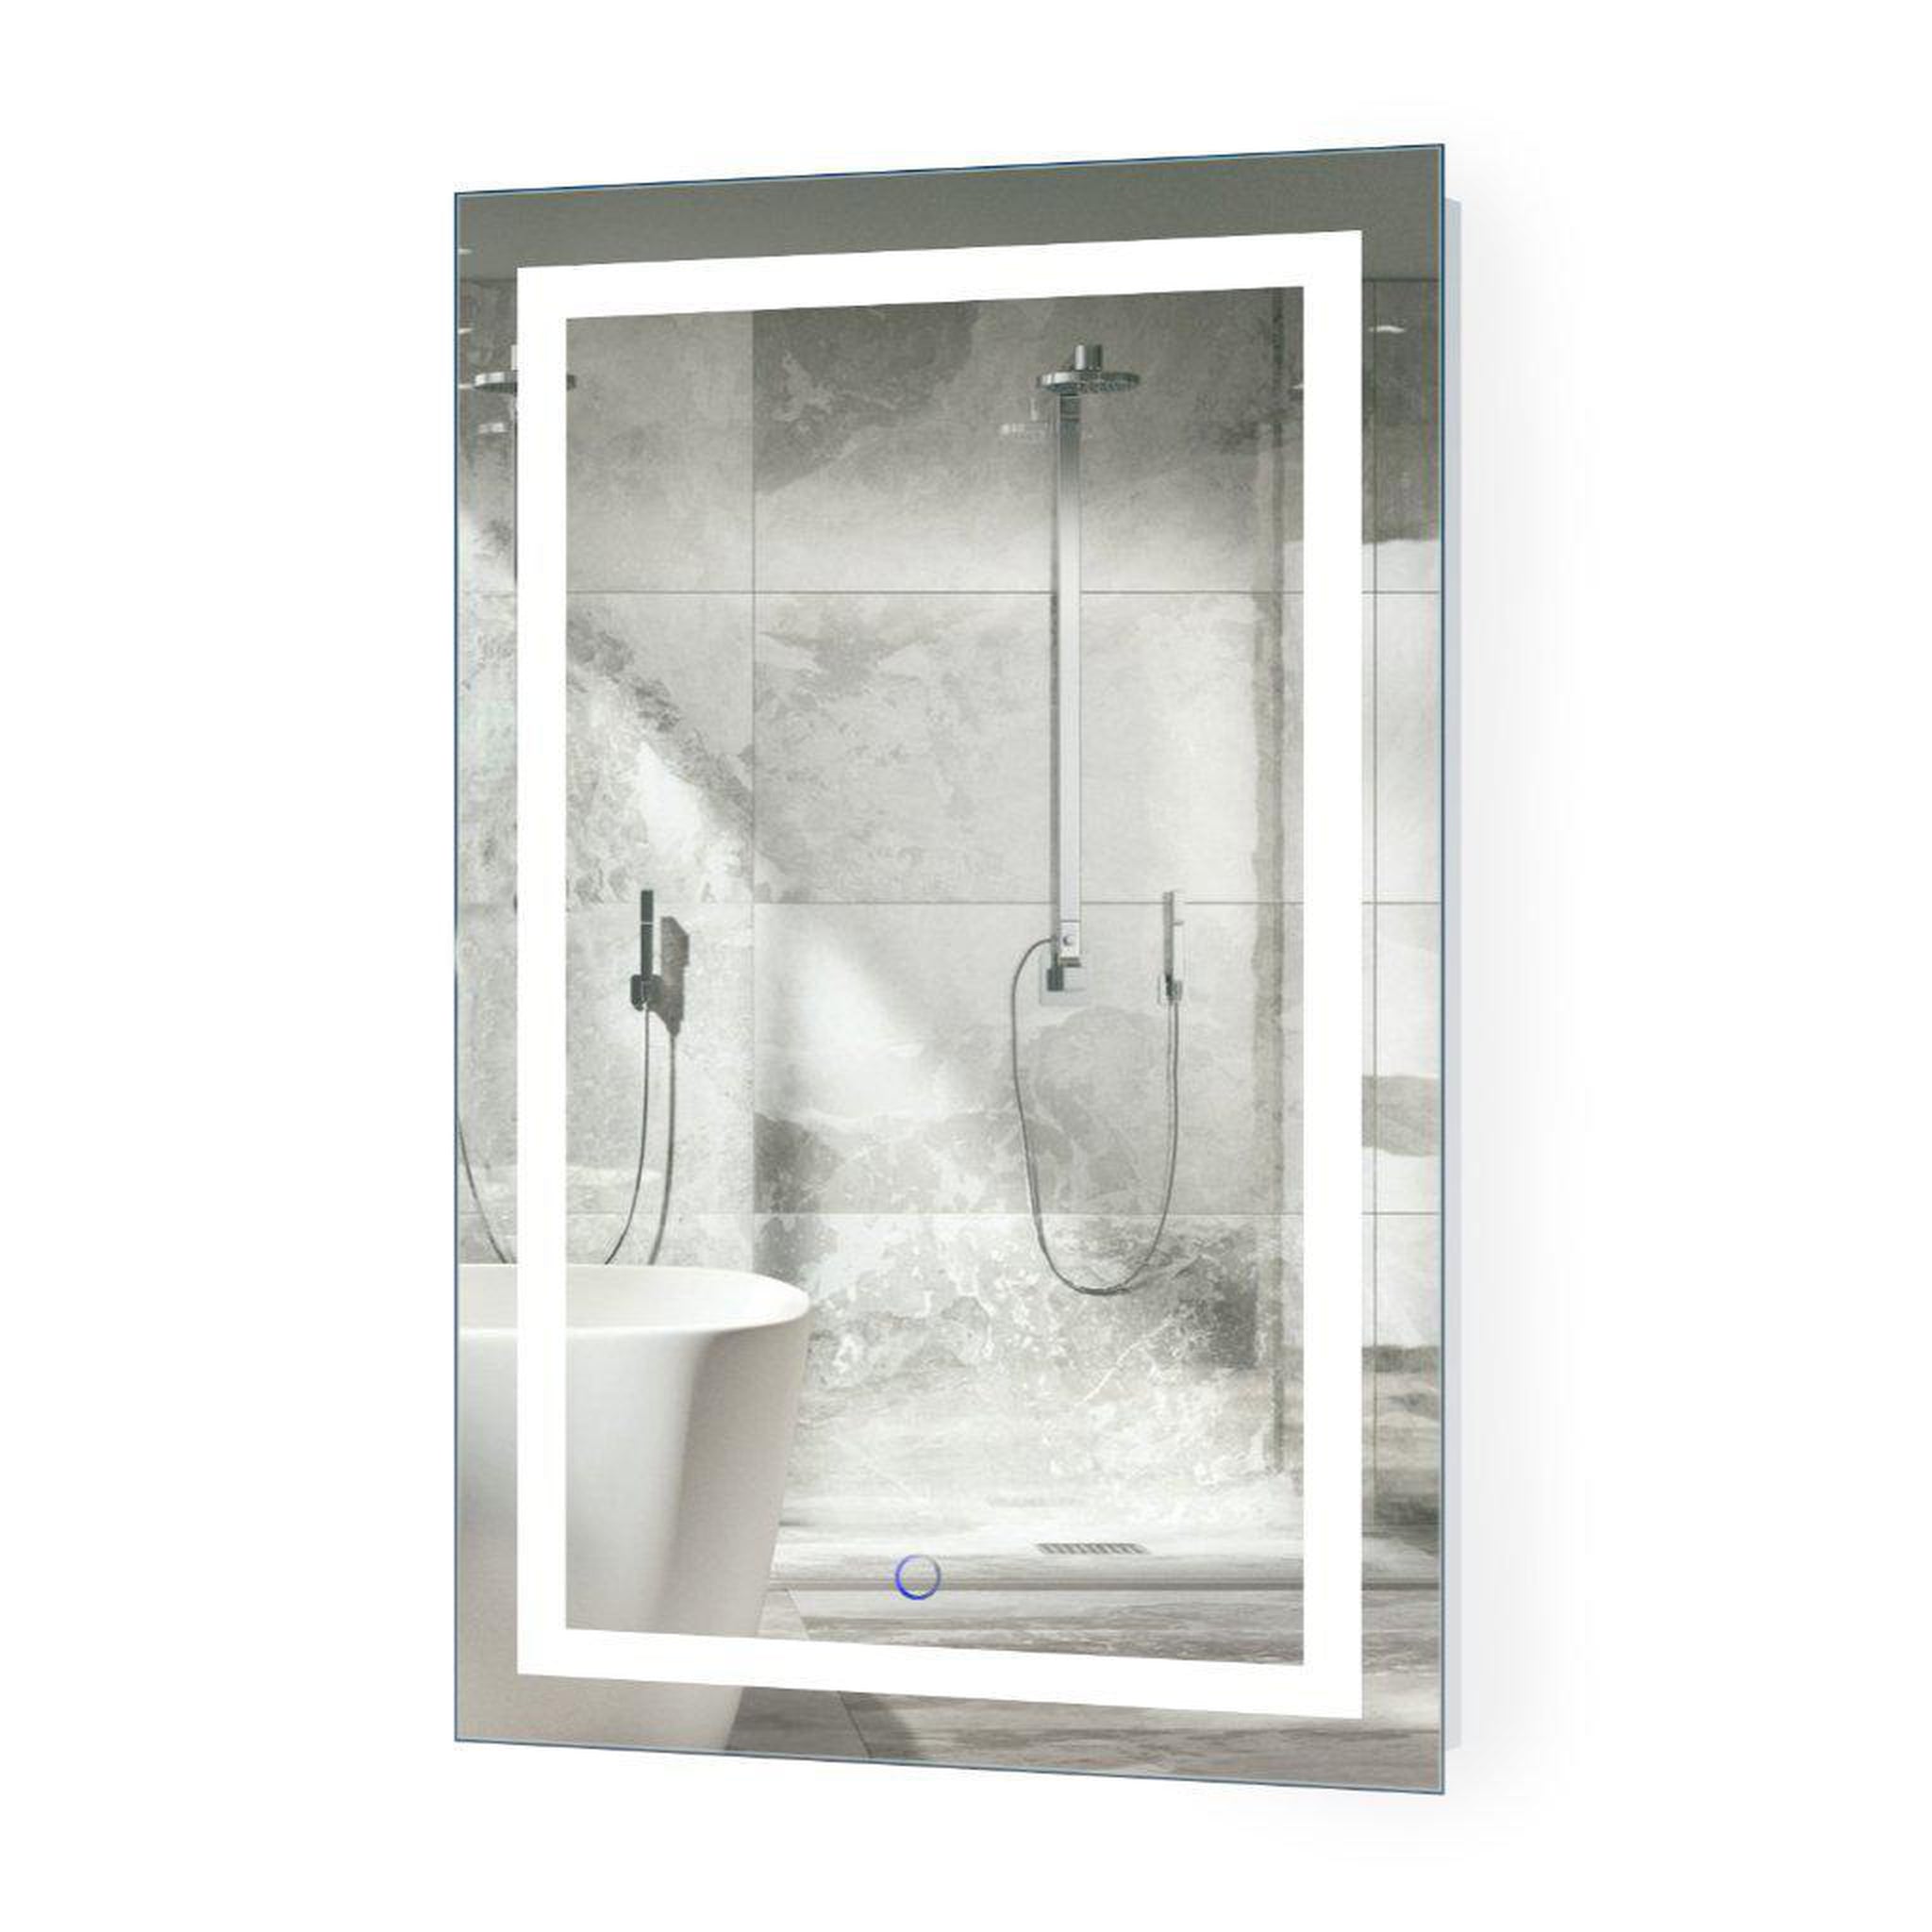 Krugg Reflections, Krugg Reflections Icon 32" x 20" 5000K Rectangular Wall-Mounted Illuminated Silver Backed LED Mirror With Built-in Defogger and Touch Sensor On/Off Built-in Dimmer